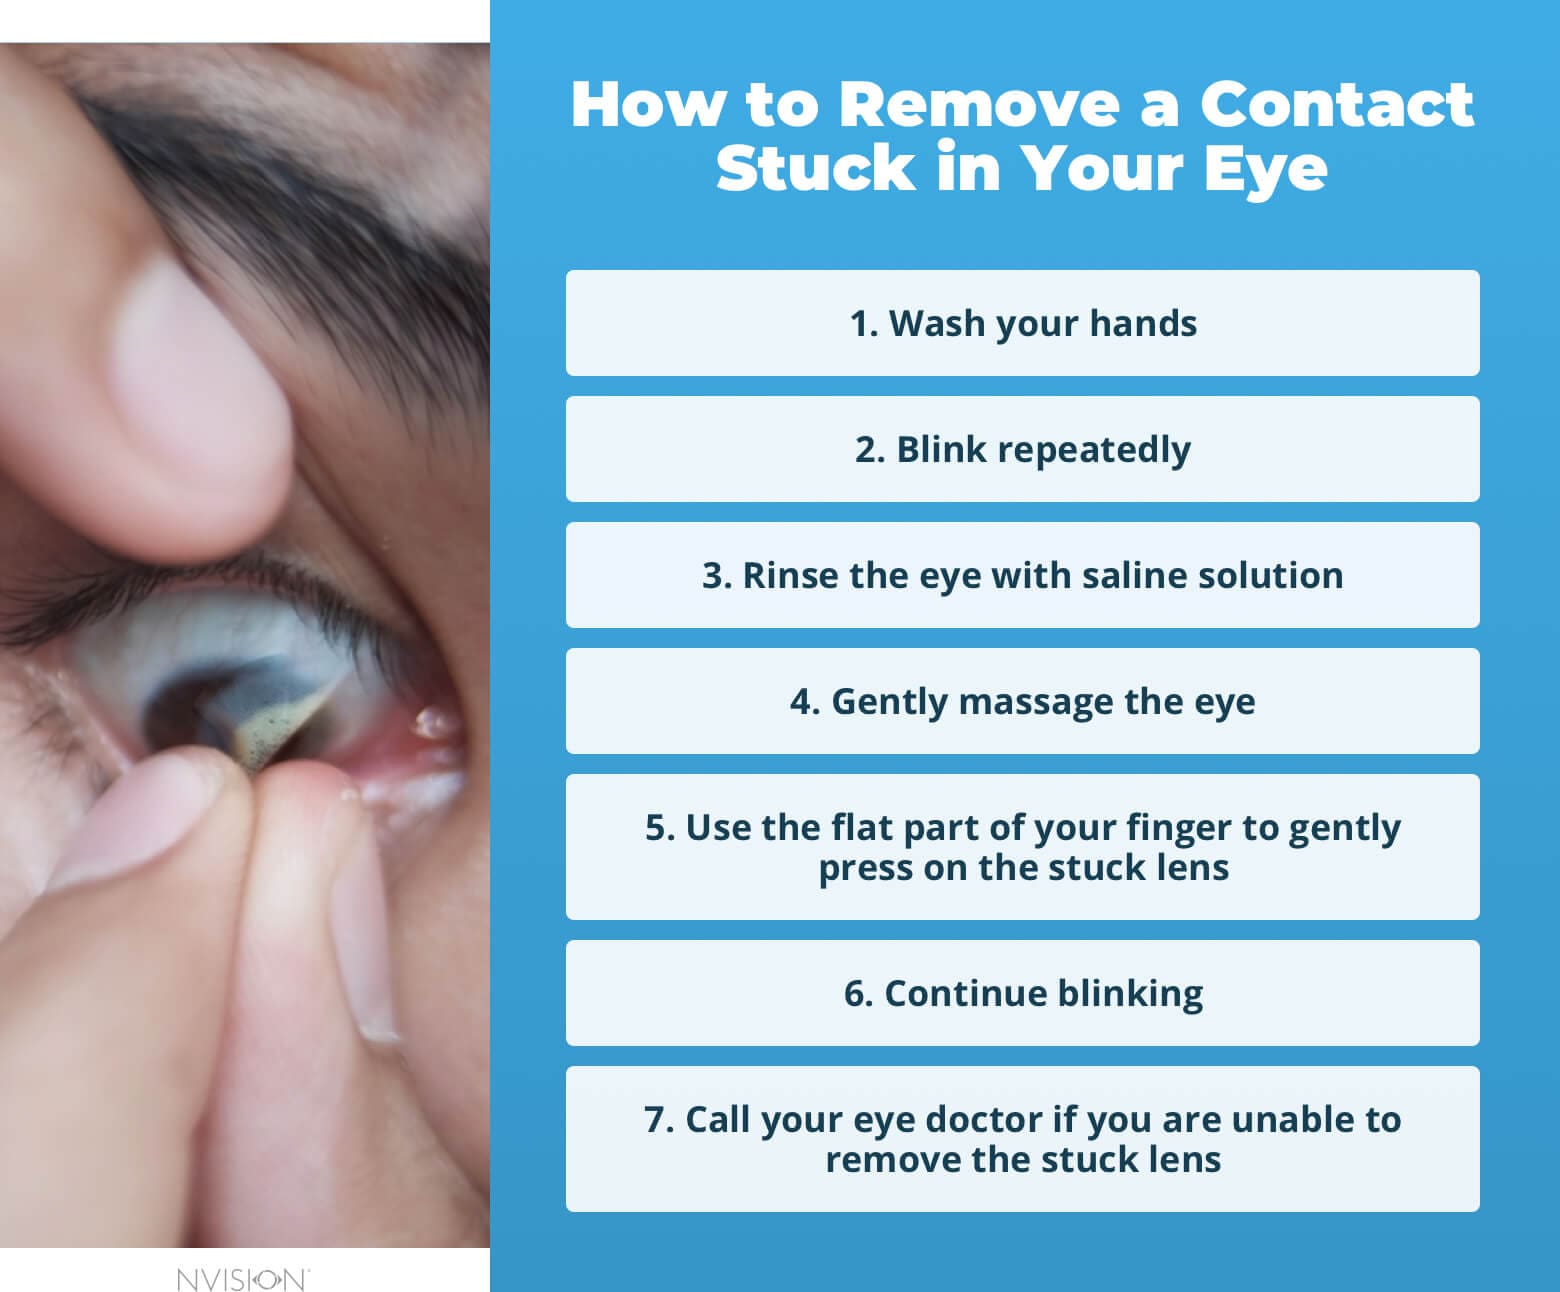 How To Safely Remove A Contact Lens Stuck In Your Eye